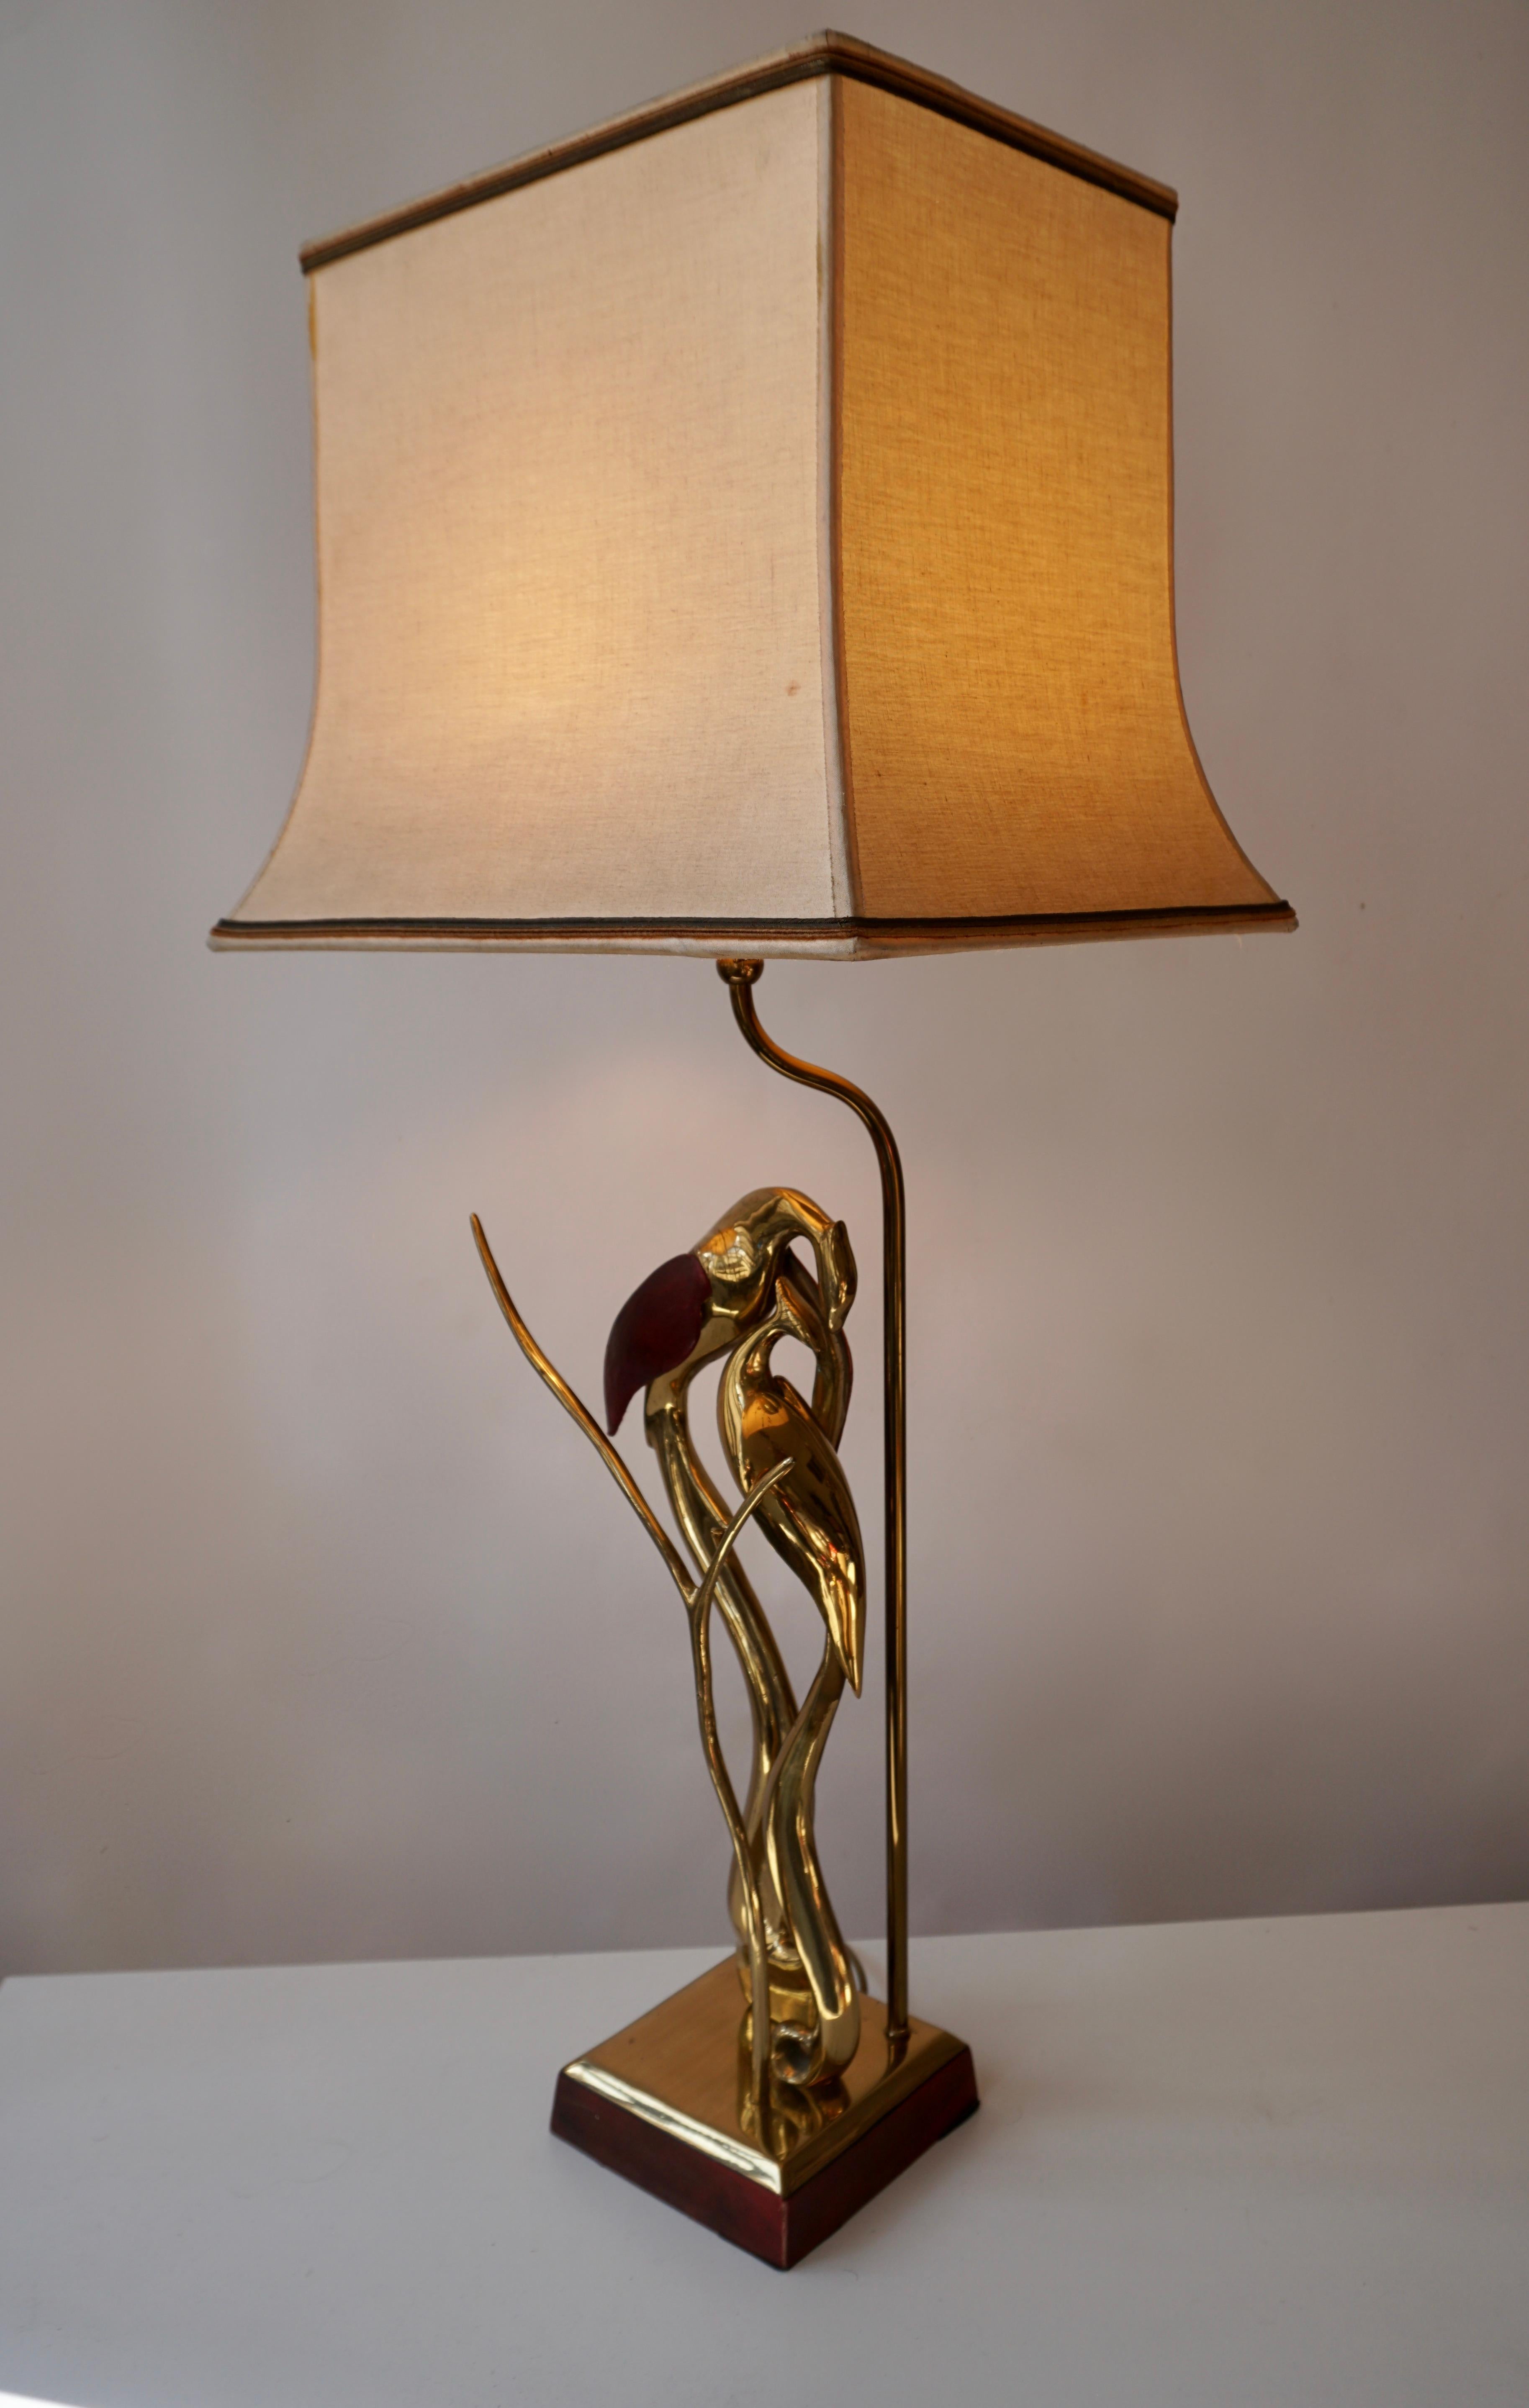 This beautiful sculptural bird lamp is made of brass with leather wings, circa 1970.
Measures: Height 82 cm.
Width 35 cm.
Depth 28 cm.